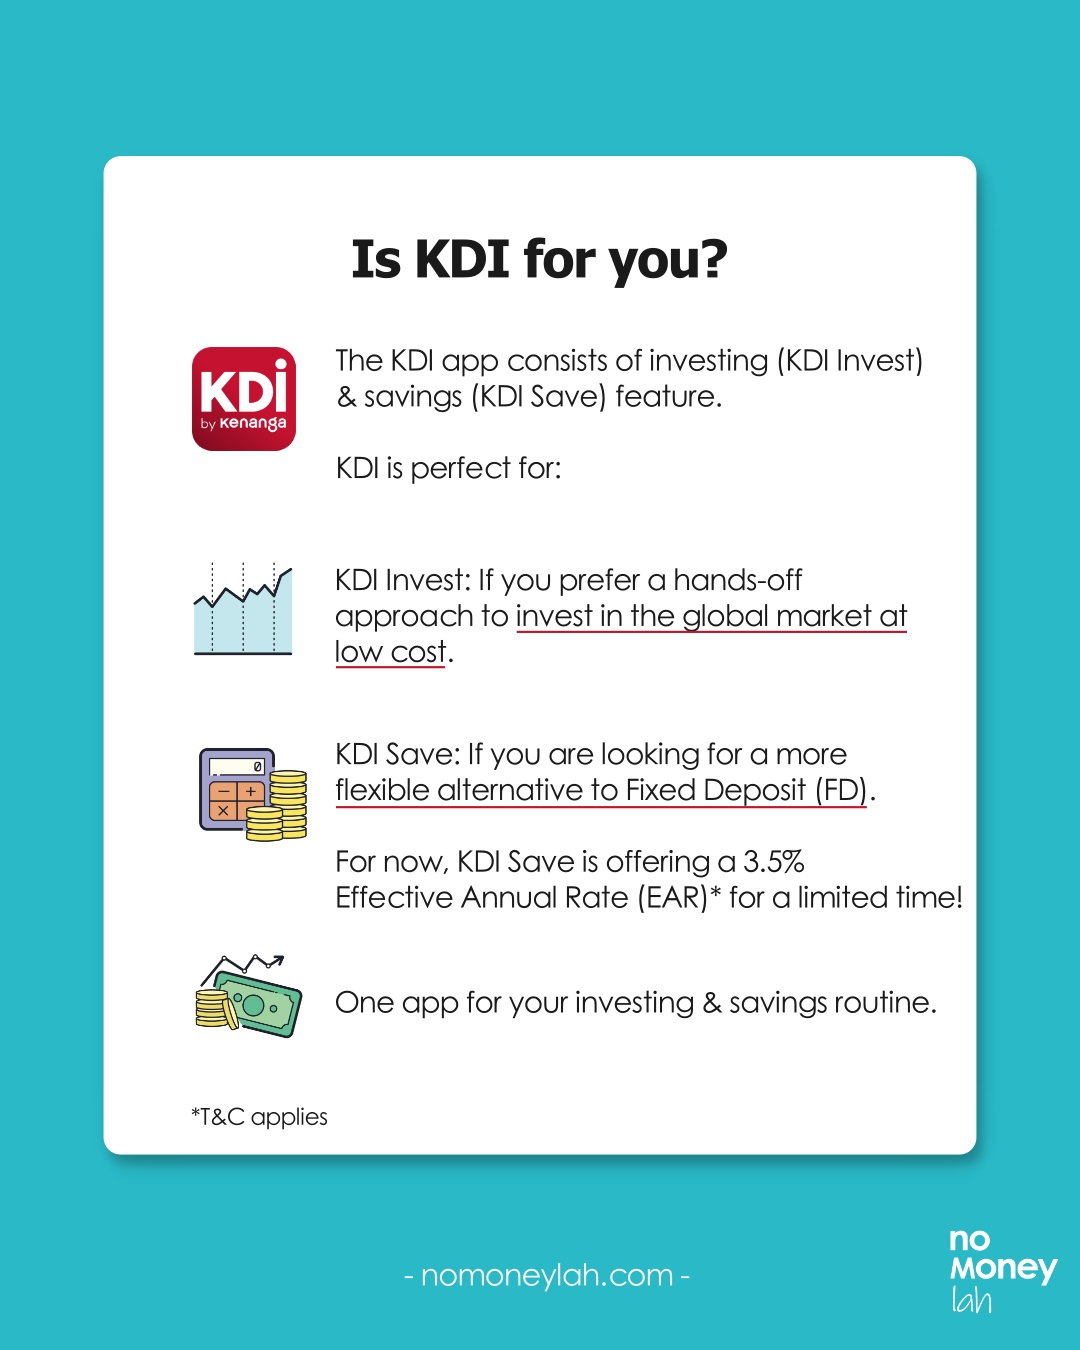 Who should use KDI Invest